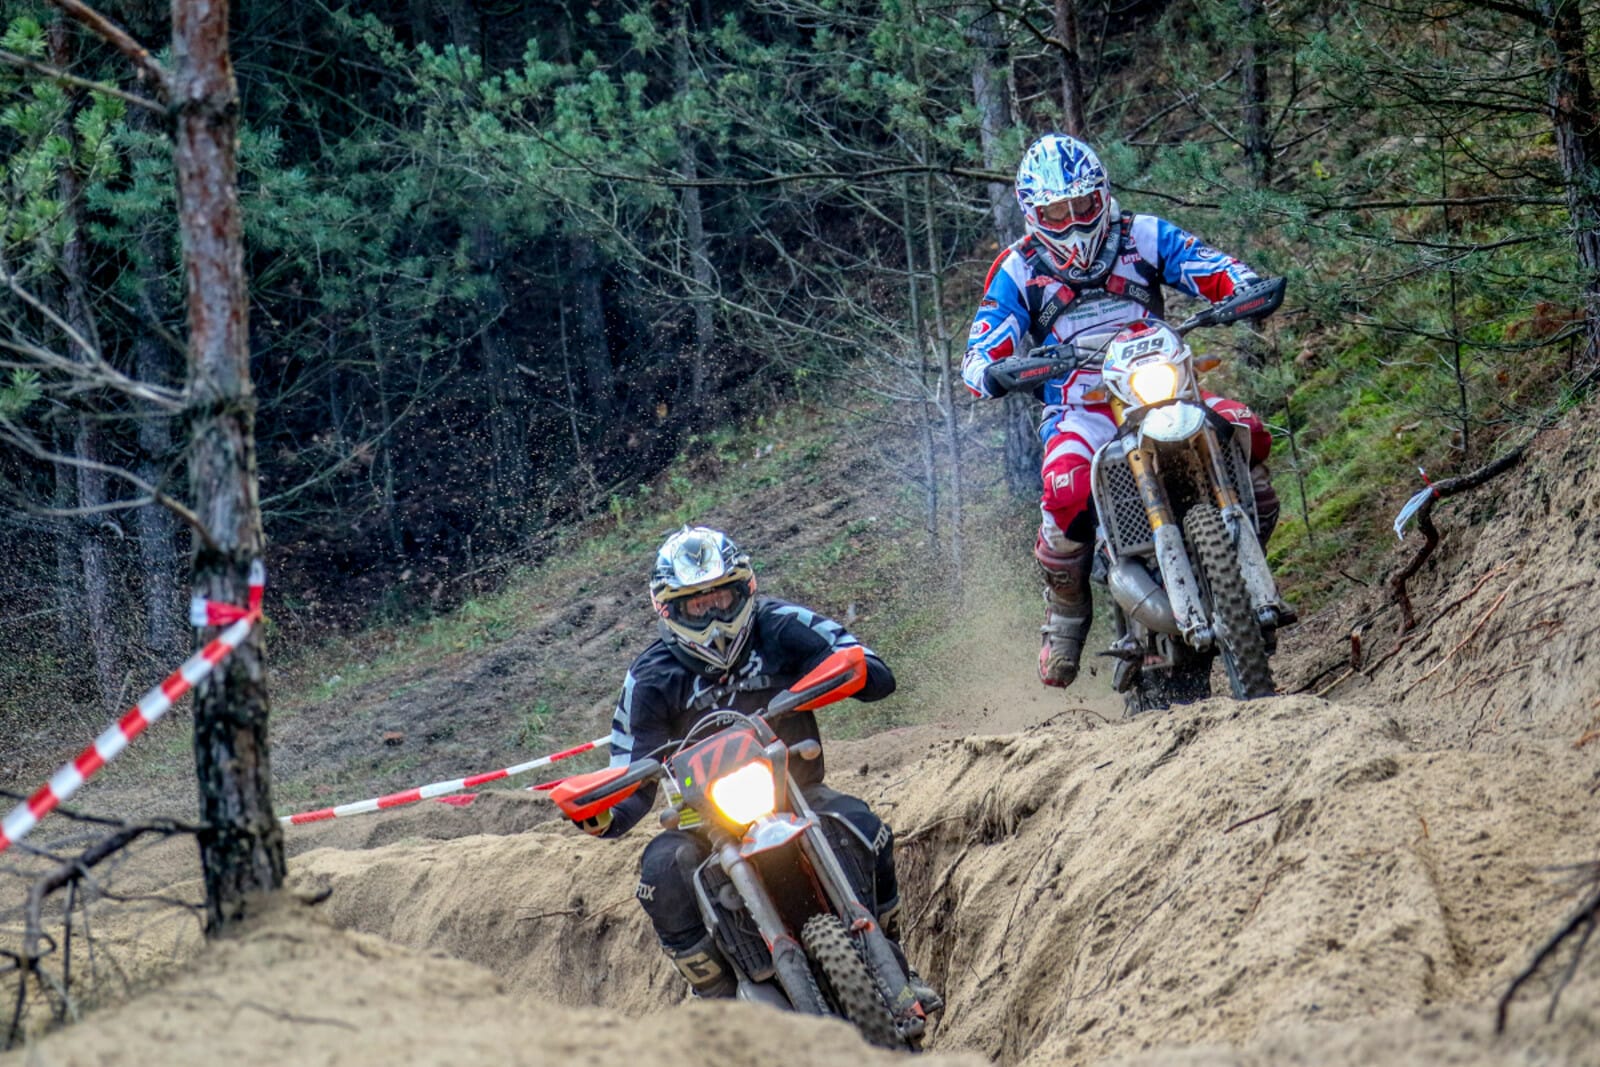 MAXXIS HardEnduroSeries Germany: Online entry for the season opener in Reetz starts on 24.08.2020
- also in the App MOTORCYCLE NEWS